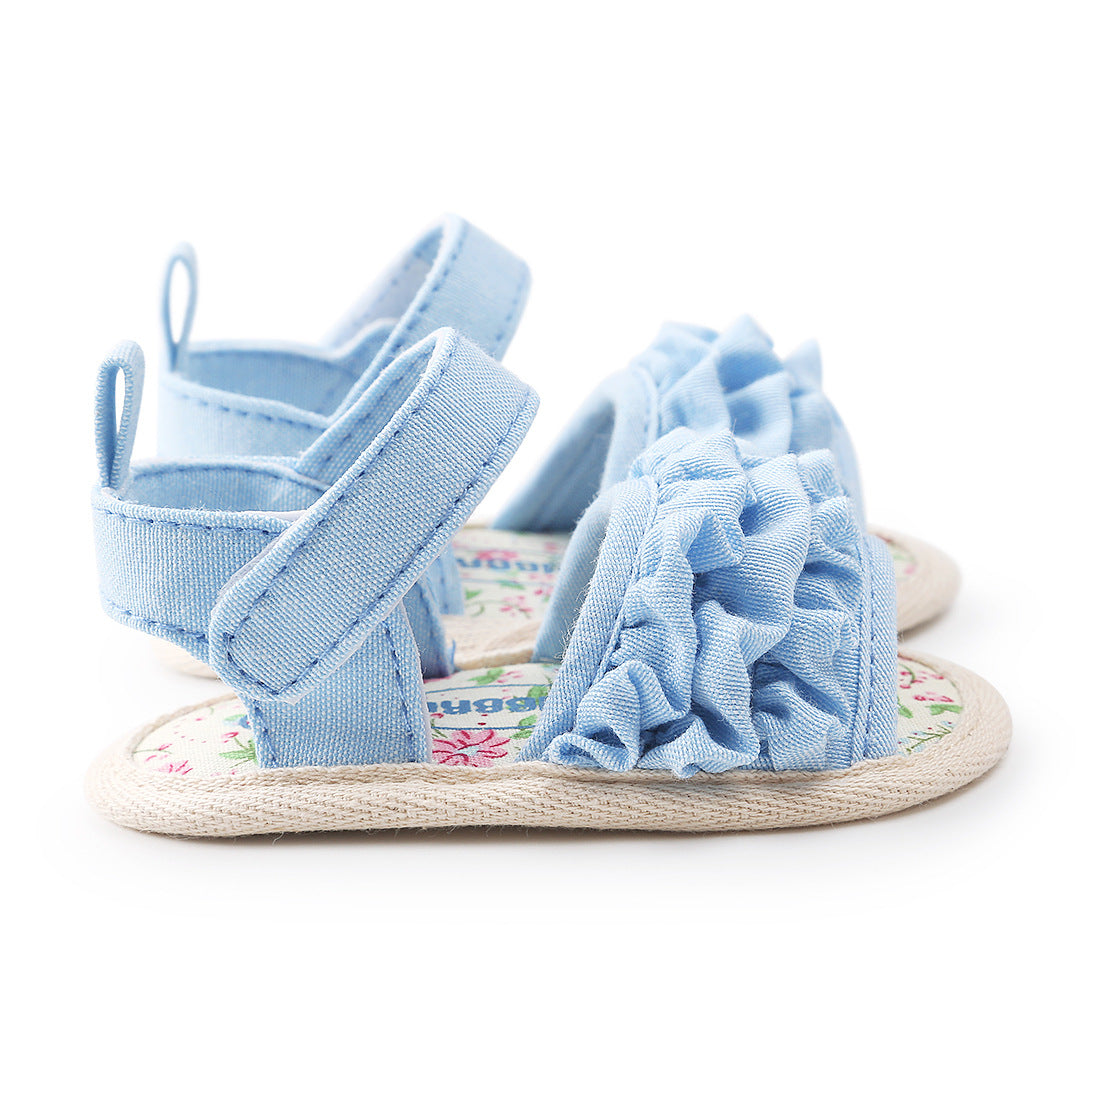 Baby Girl Ruffled Floral Sandals Magic Tape - Little Kooma